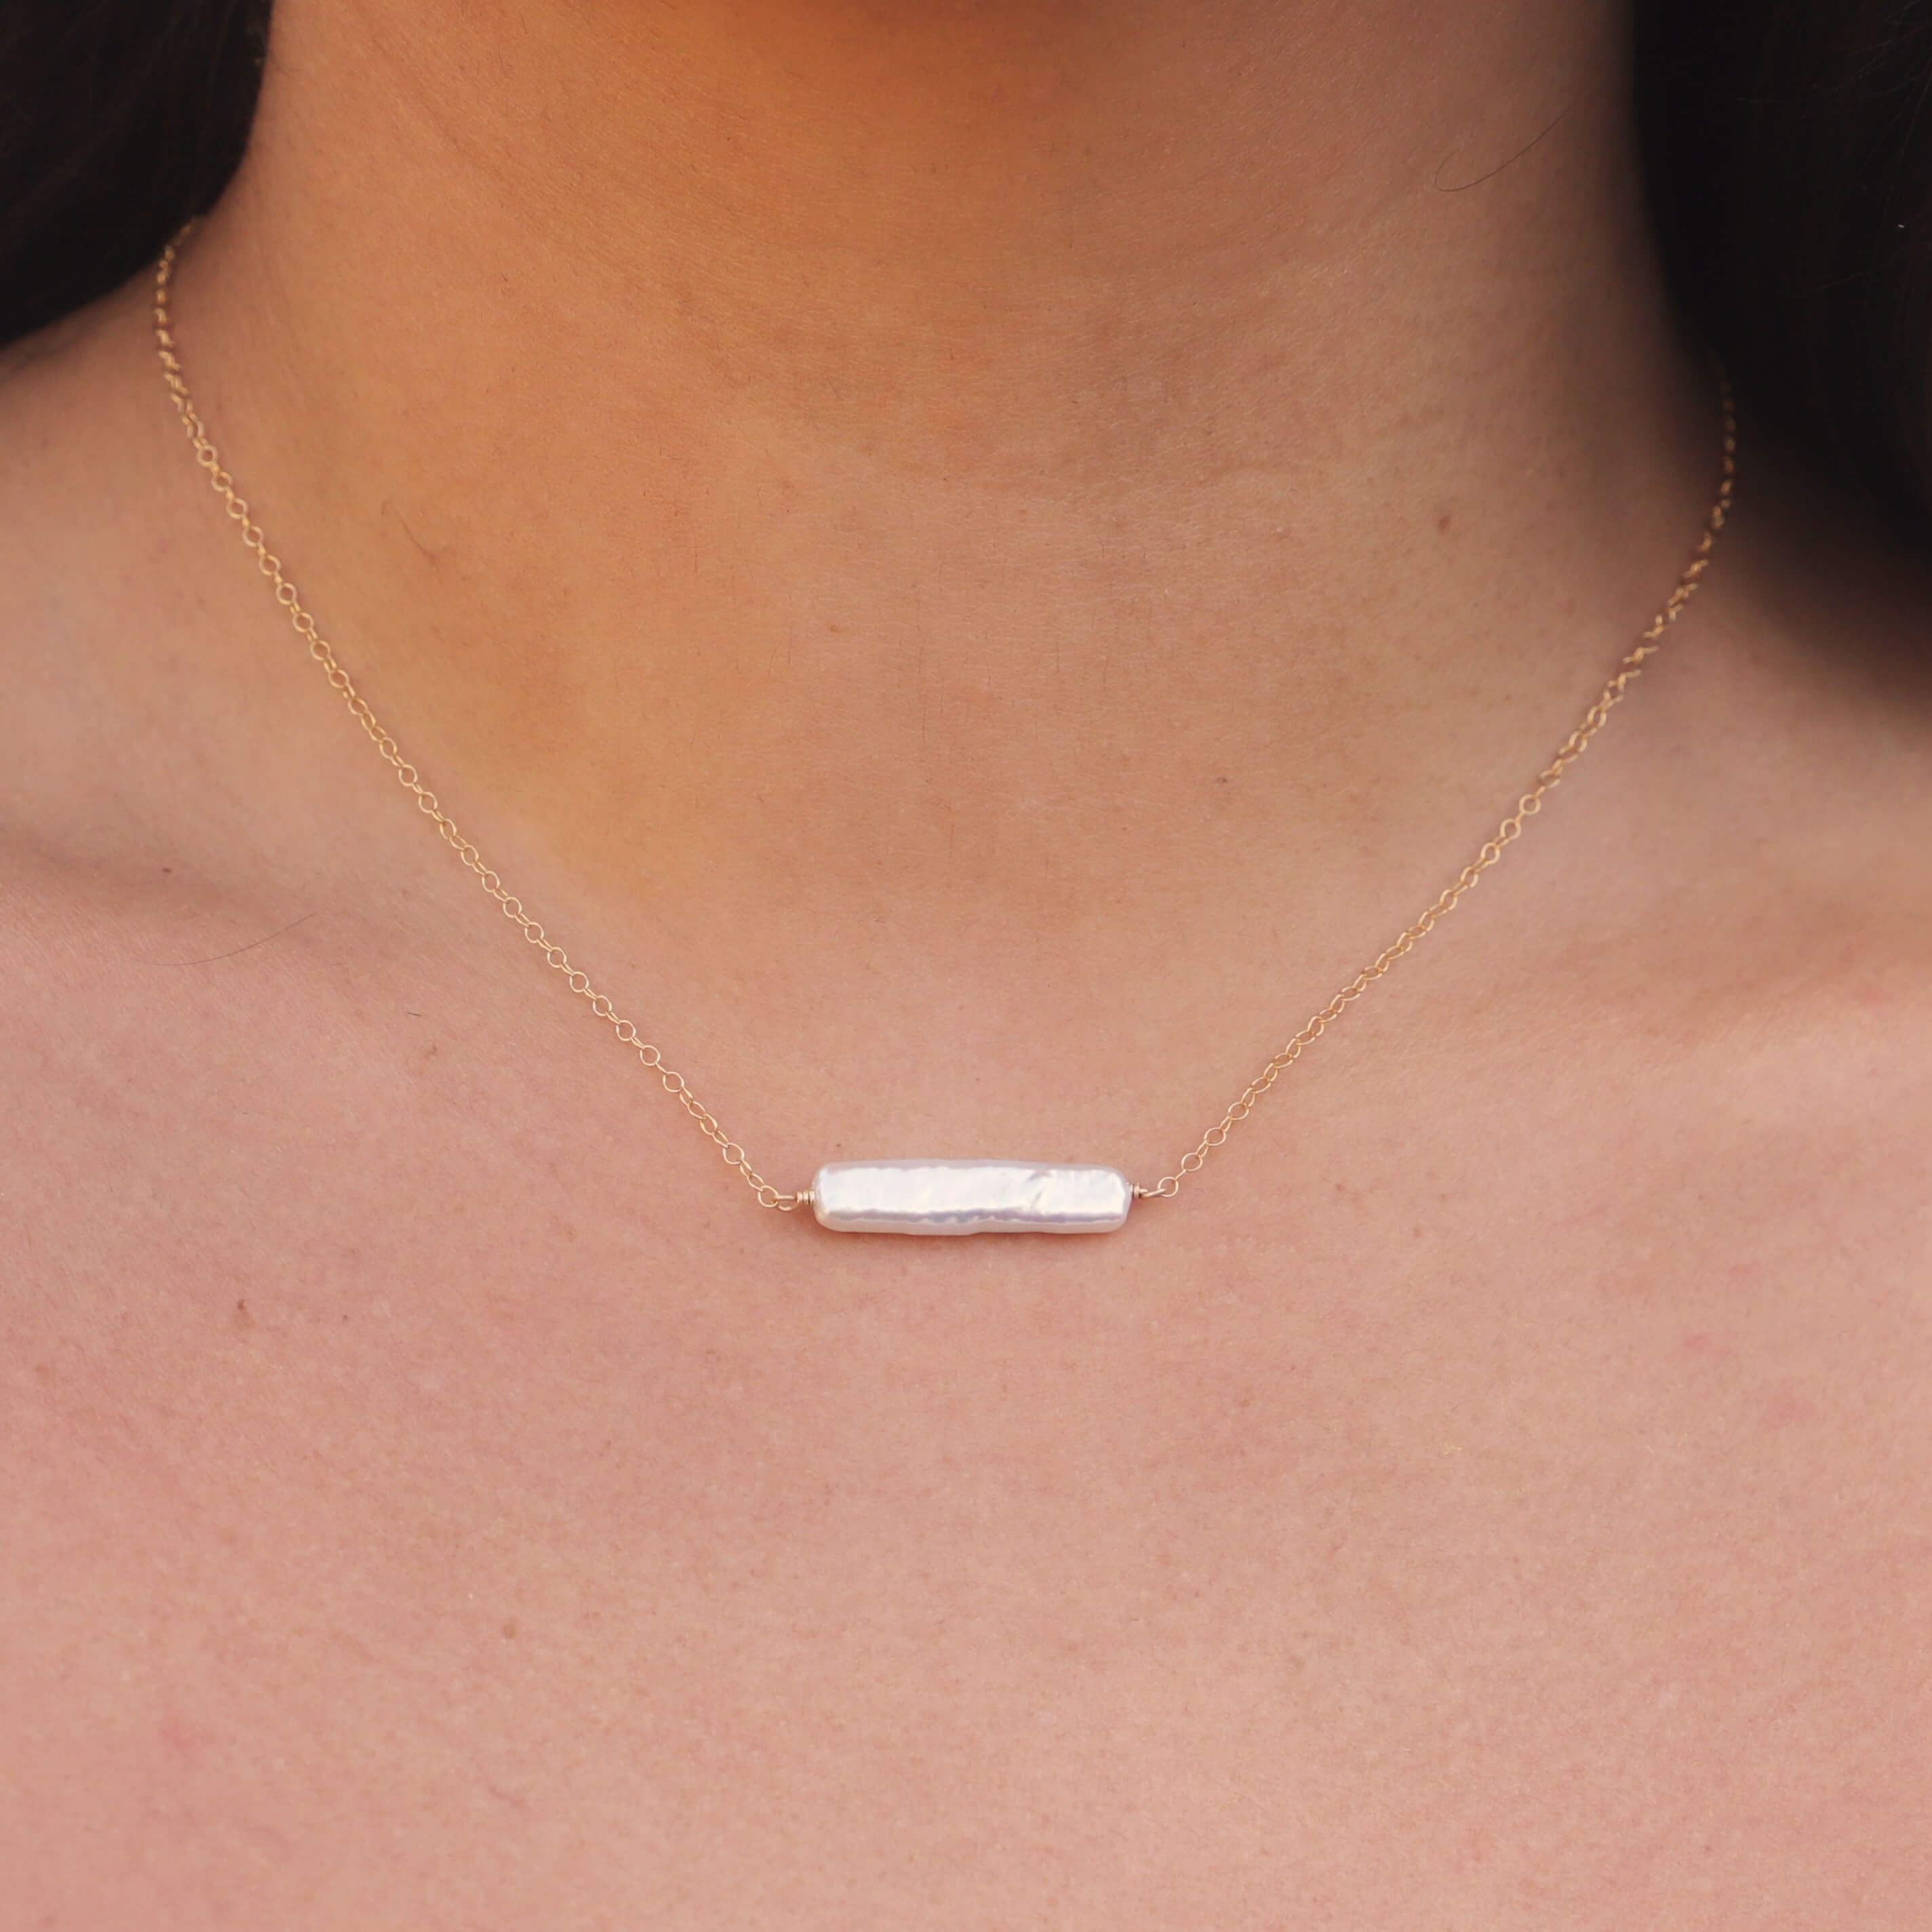 Model's neck with rectangular shaped pearl on fine gold chain